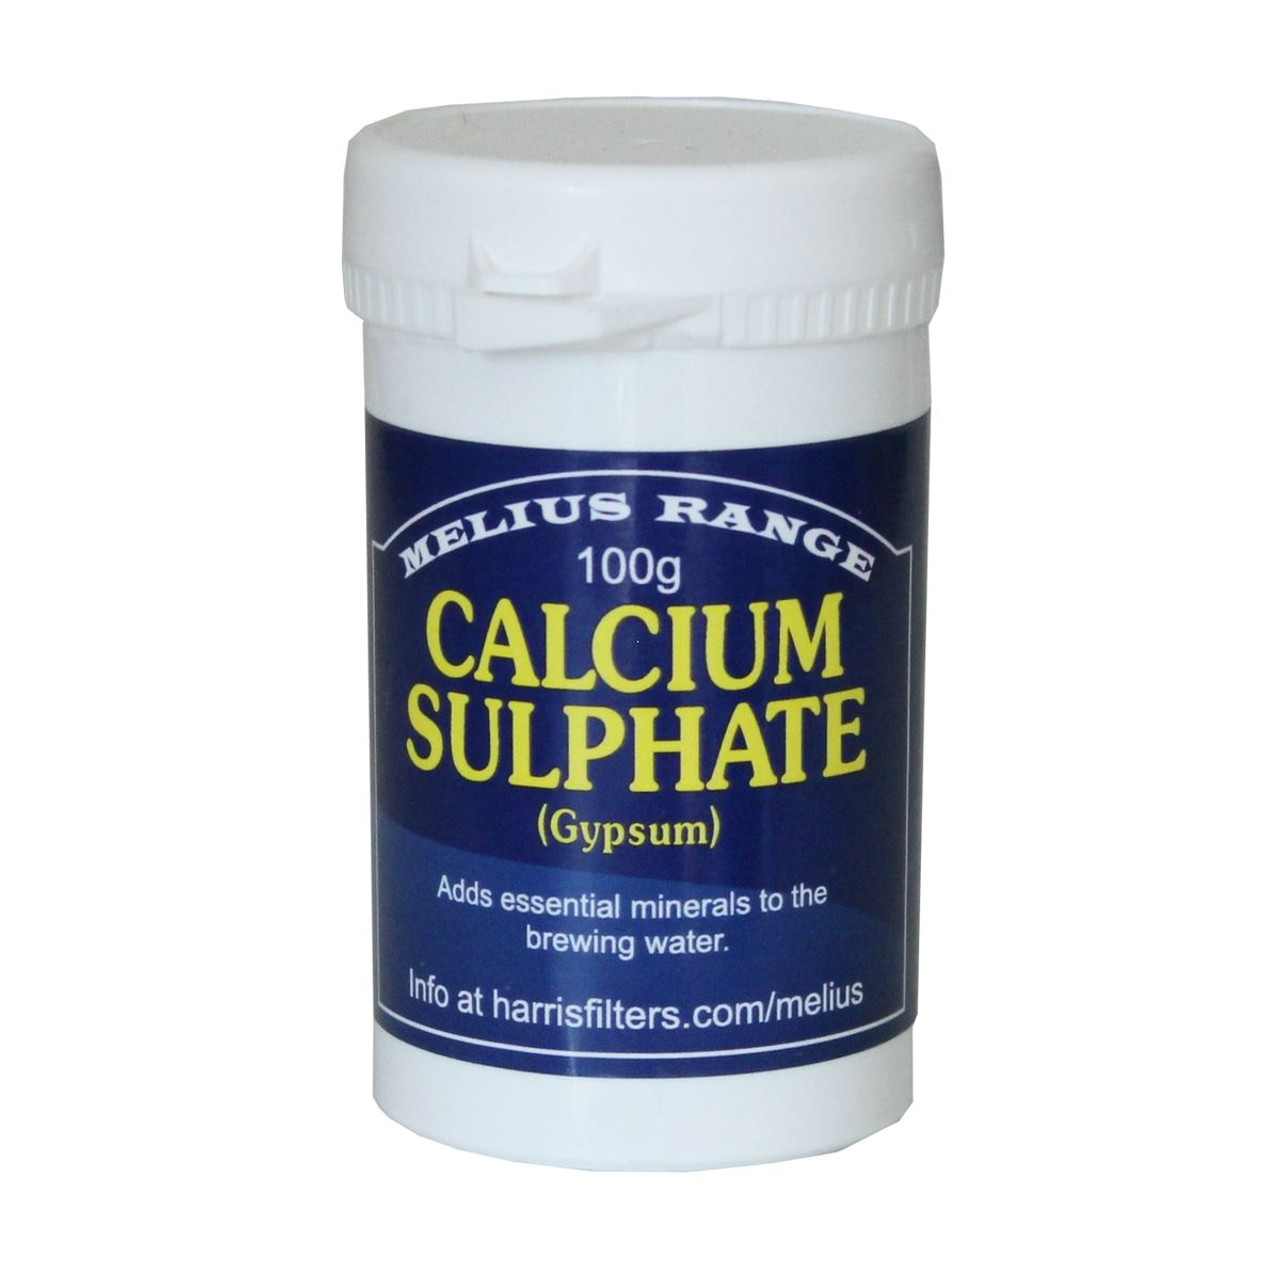 Calcium Sulphate Gypsum 100g Home brew Beer Making Chemicals